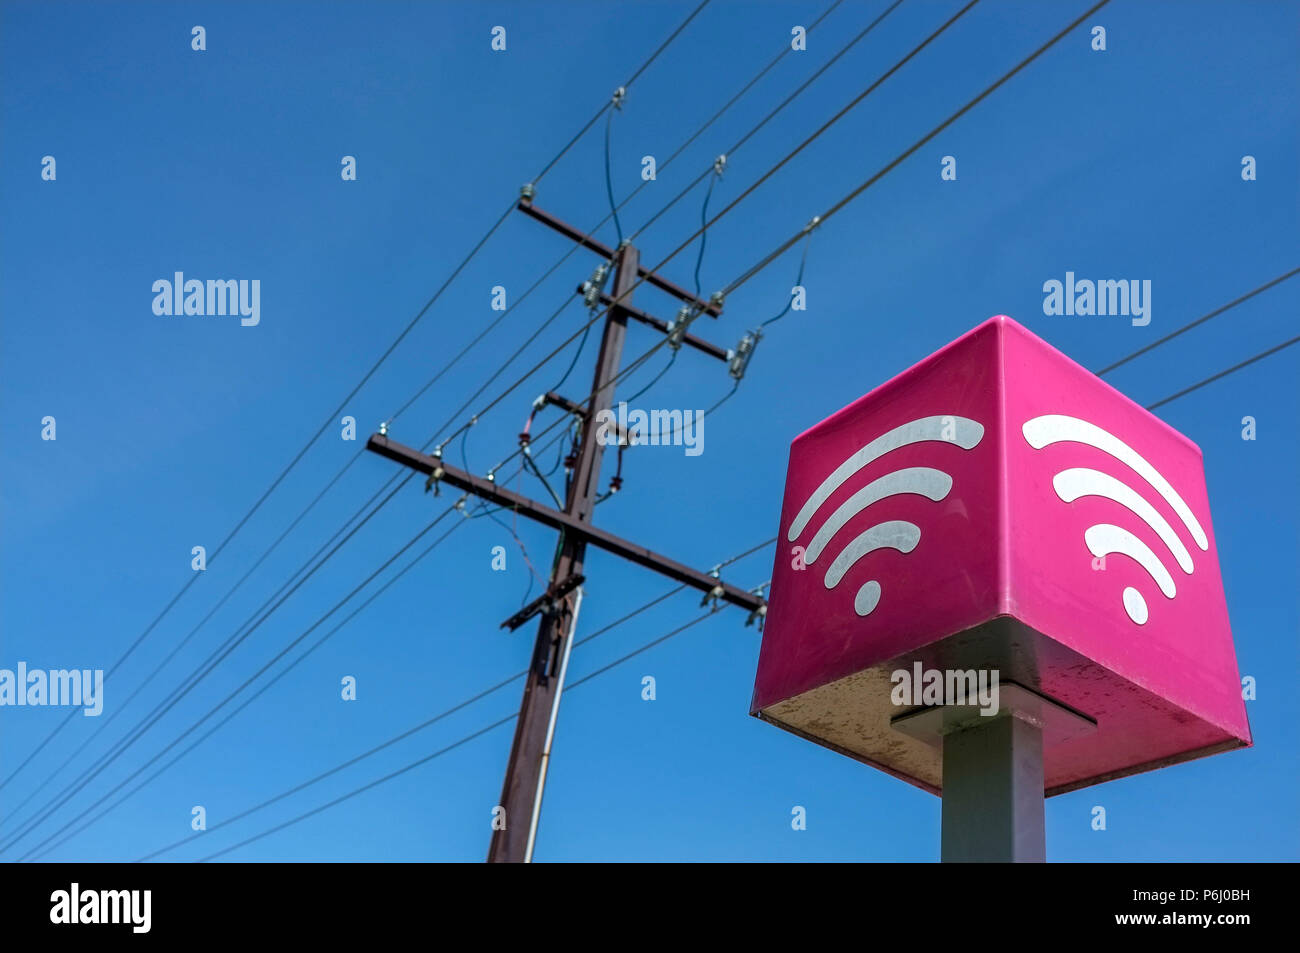 Telephone lines and Wi-Fi sign, against a blue sky. Stock Photo